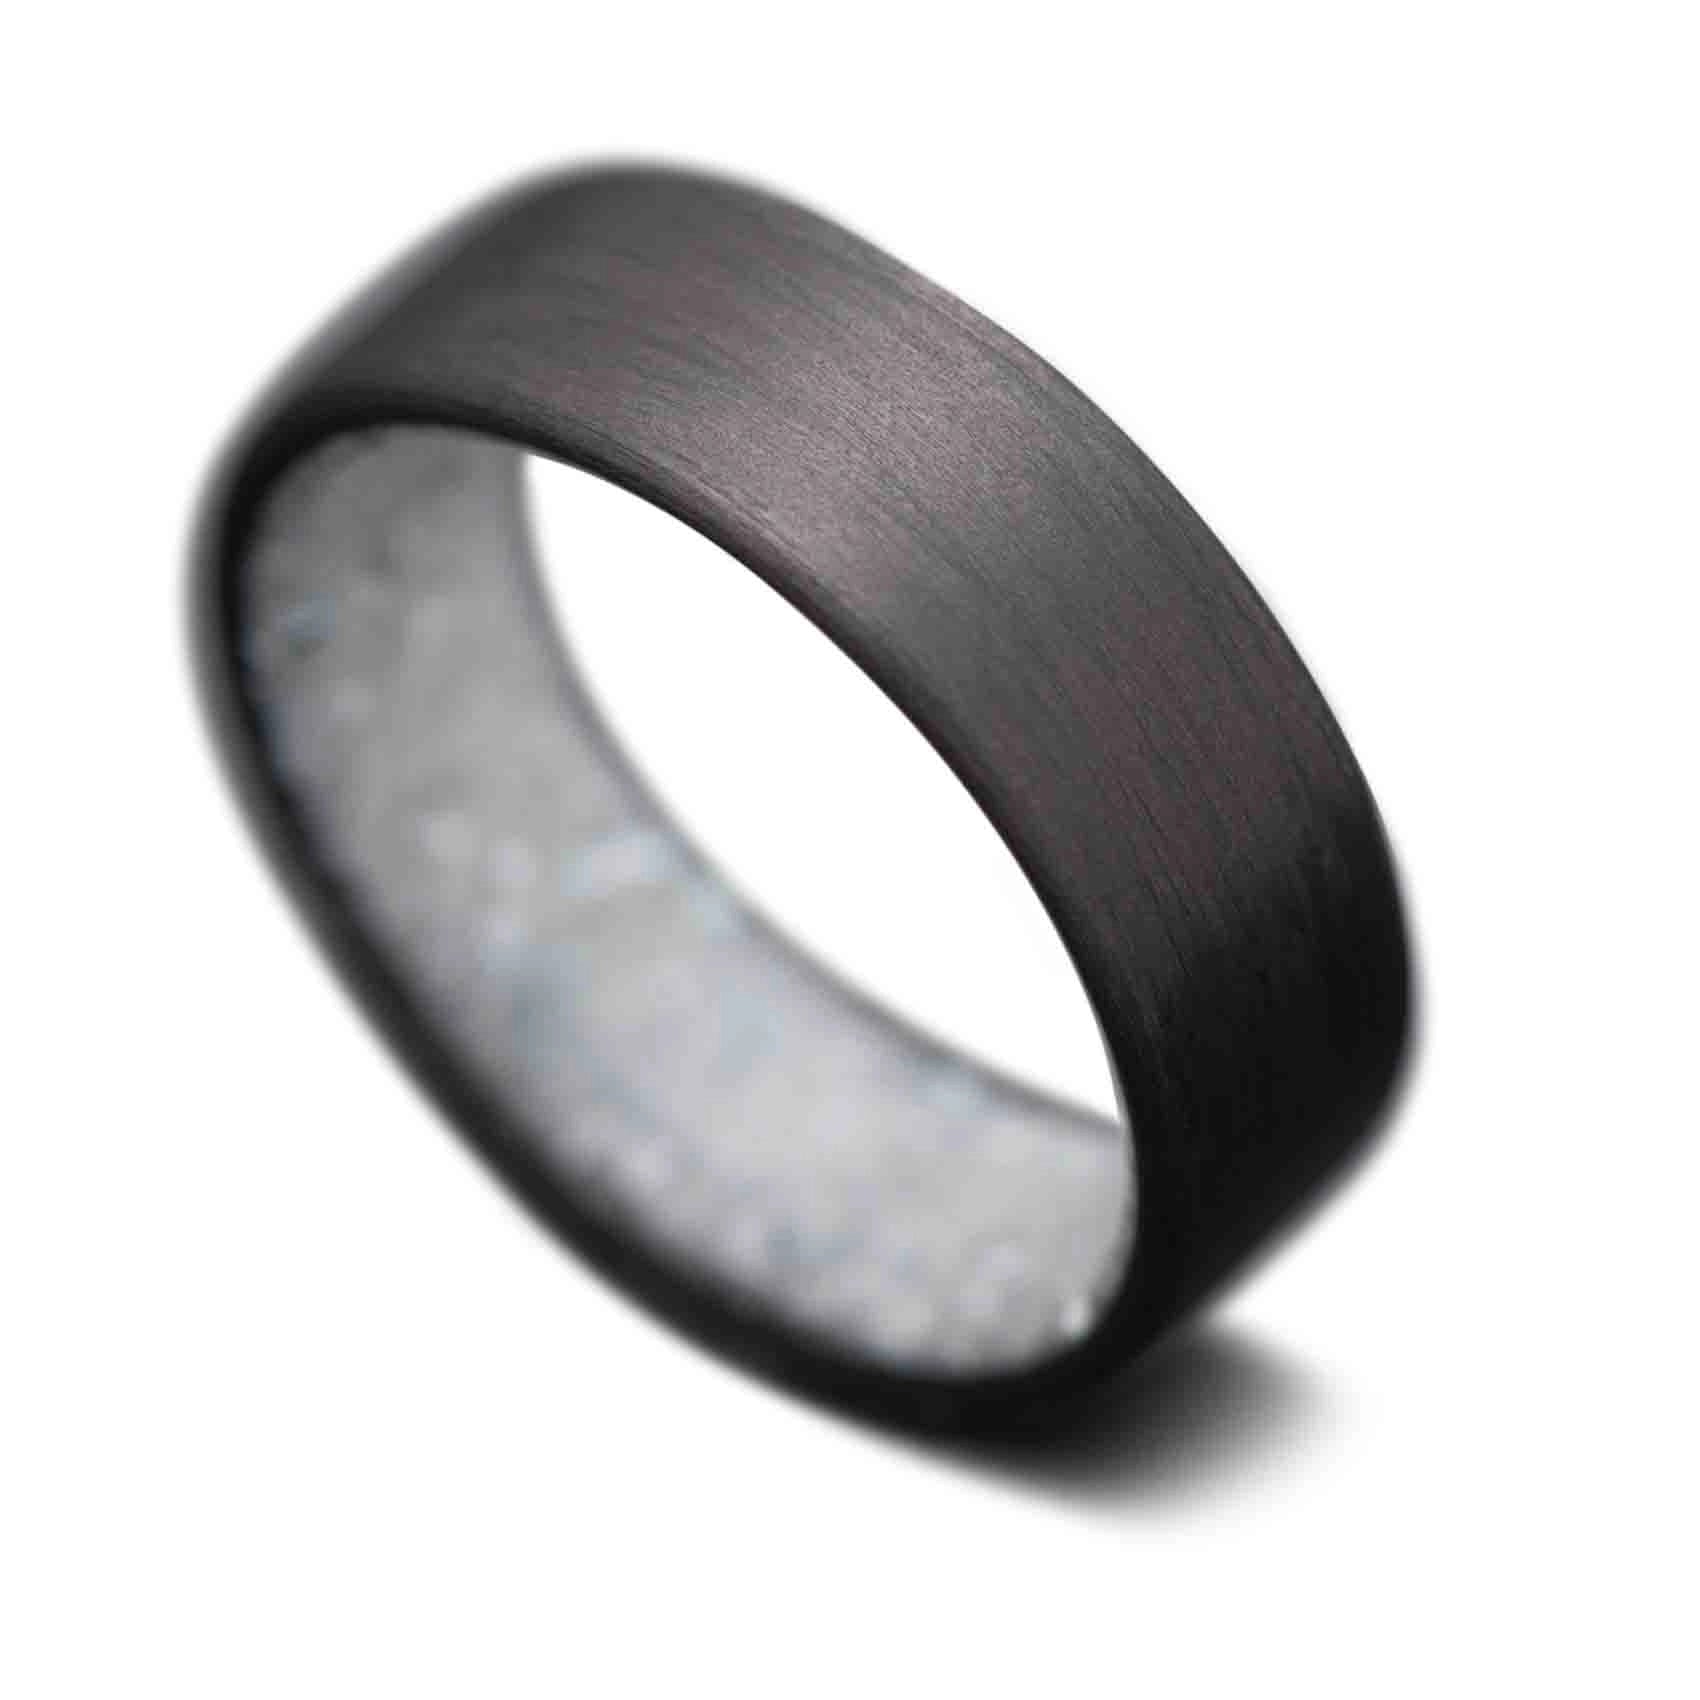 CarbonUni Core Ring with Pearl inner sleeve and matte finish, 7mm - THE QUANTUM